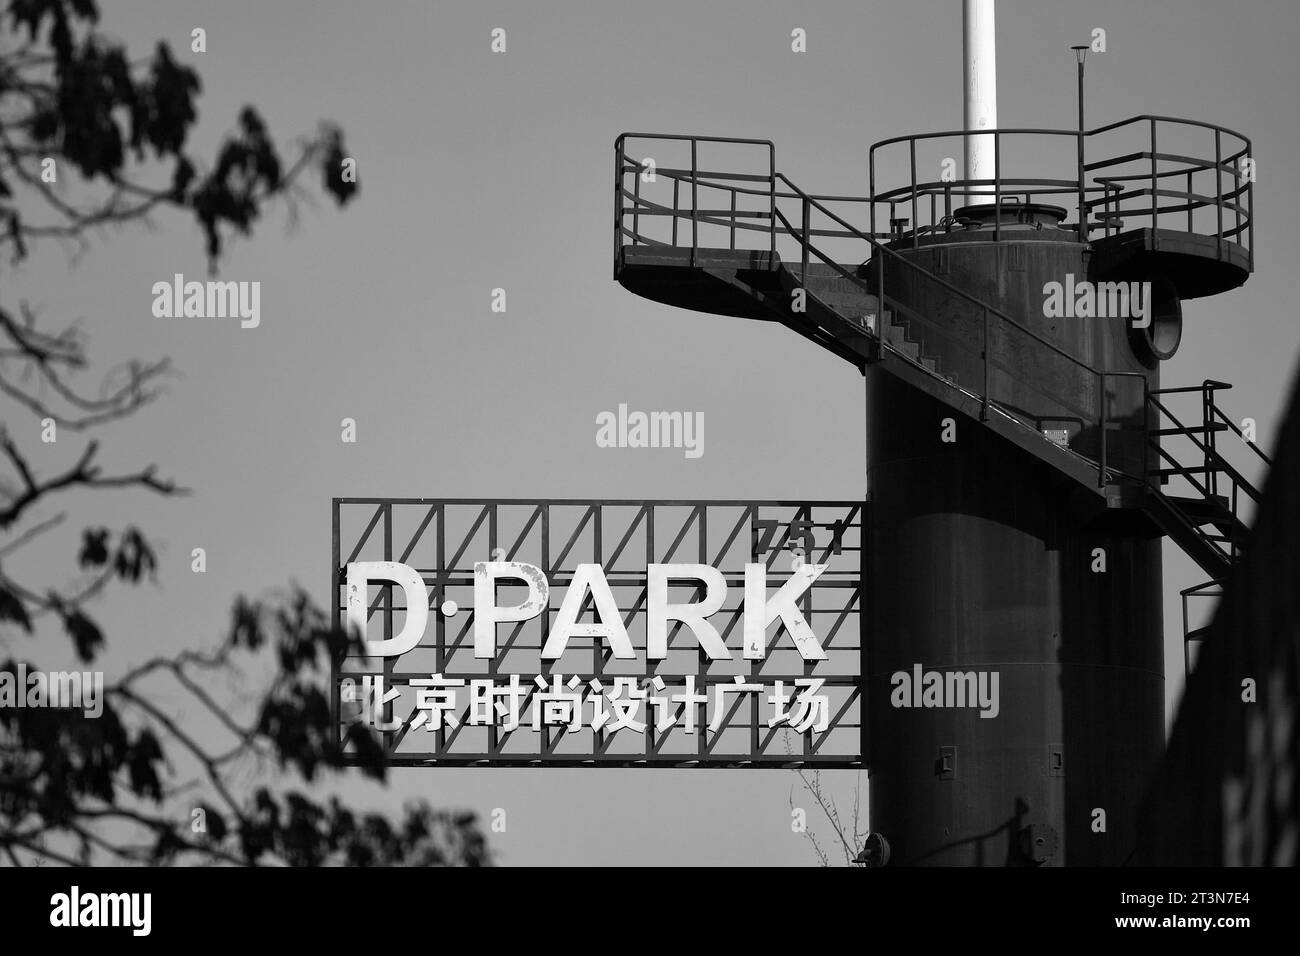 Black And White Photo Of Sign For The D PARK In The Beijing 798 Art Zone Surrounded By Dystopian, Long Abandoned Industrial Equipment, Beijing, China Stock Photo